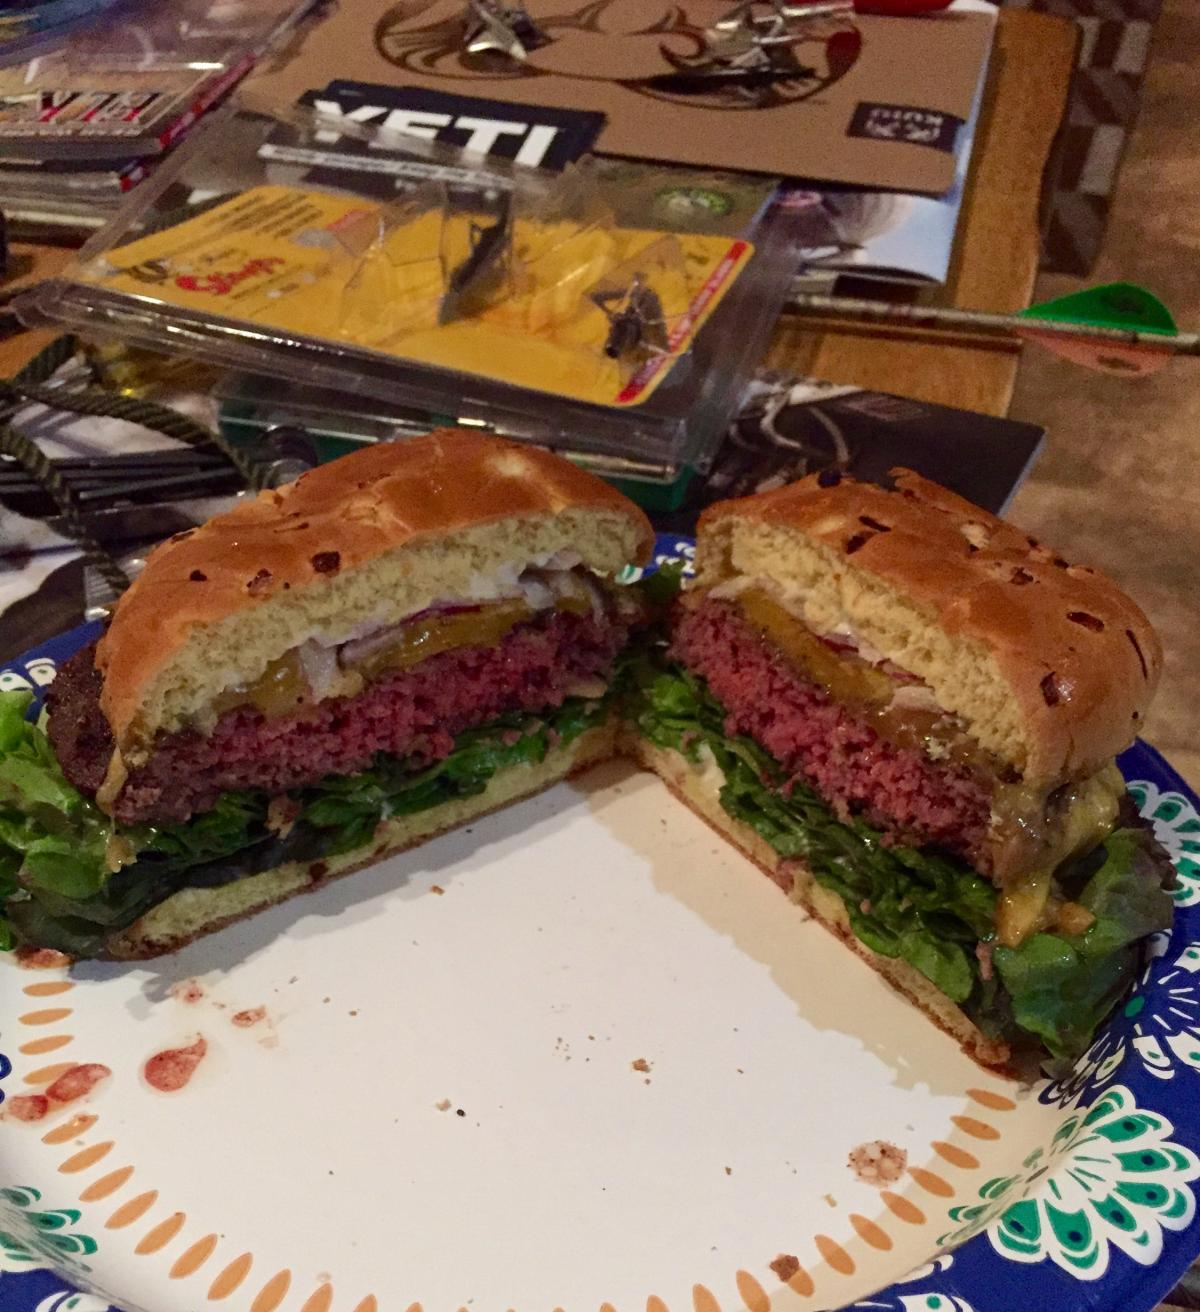 Sous vide burger - Cooking Wild Foods - CouesWhitetail.com Discussion forum